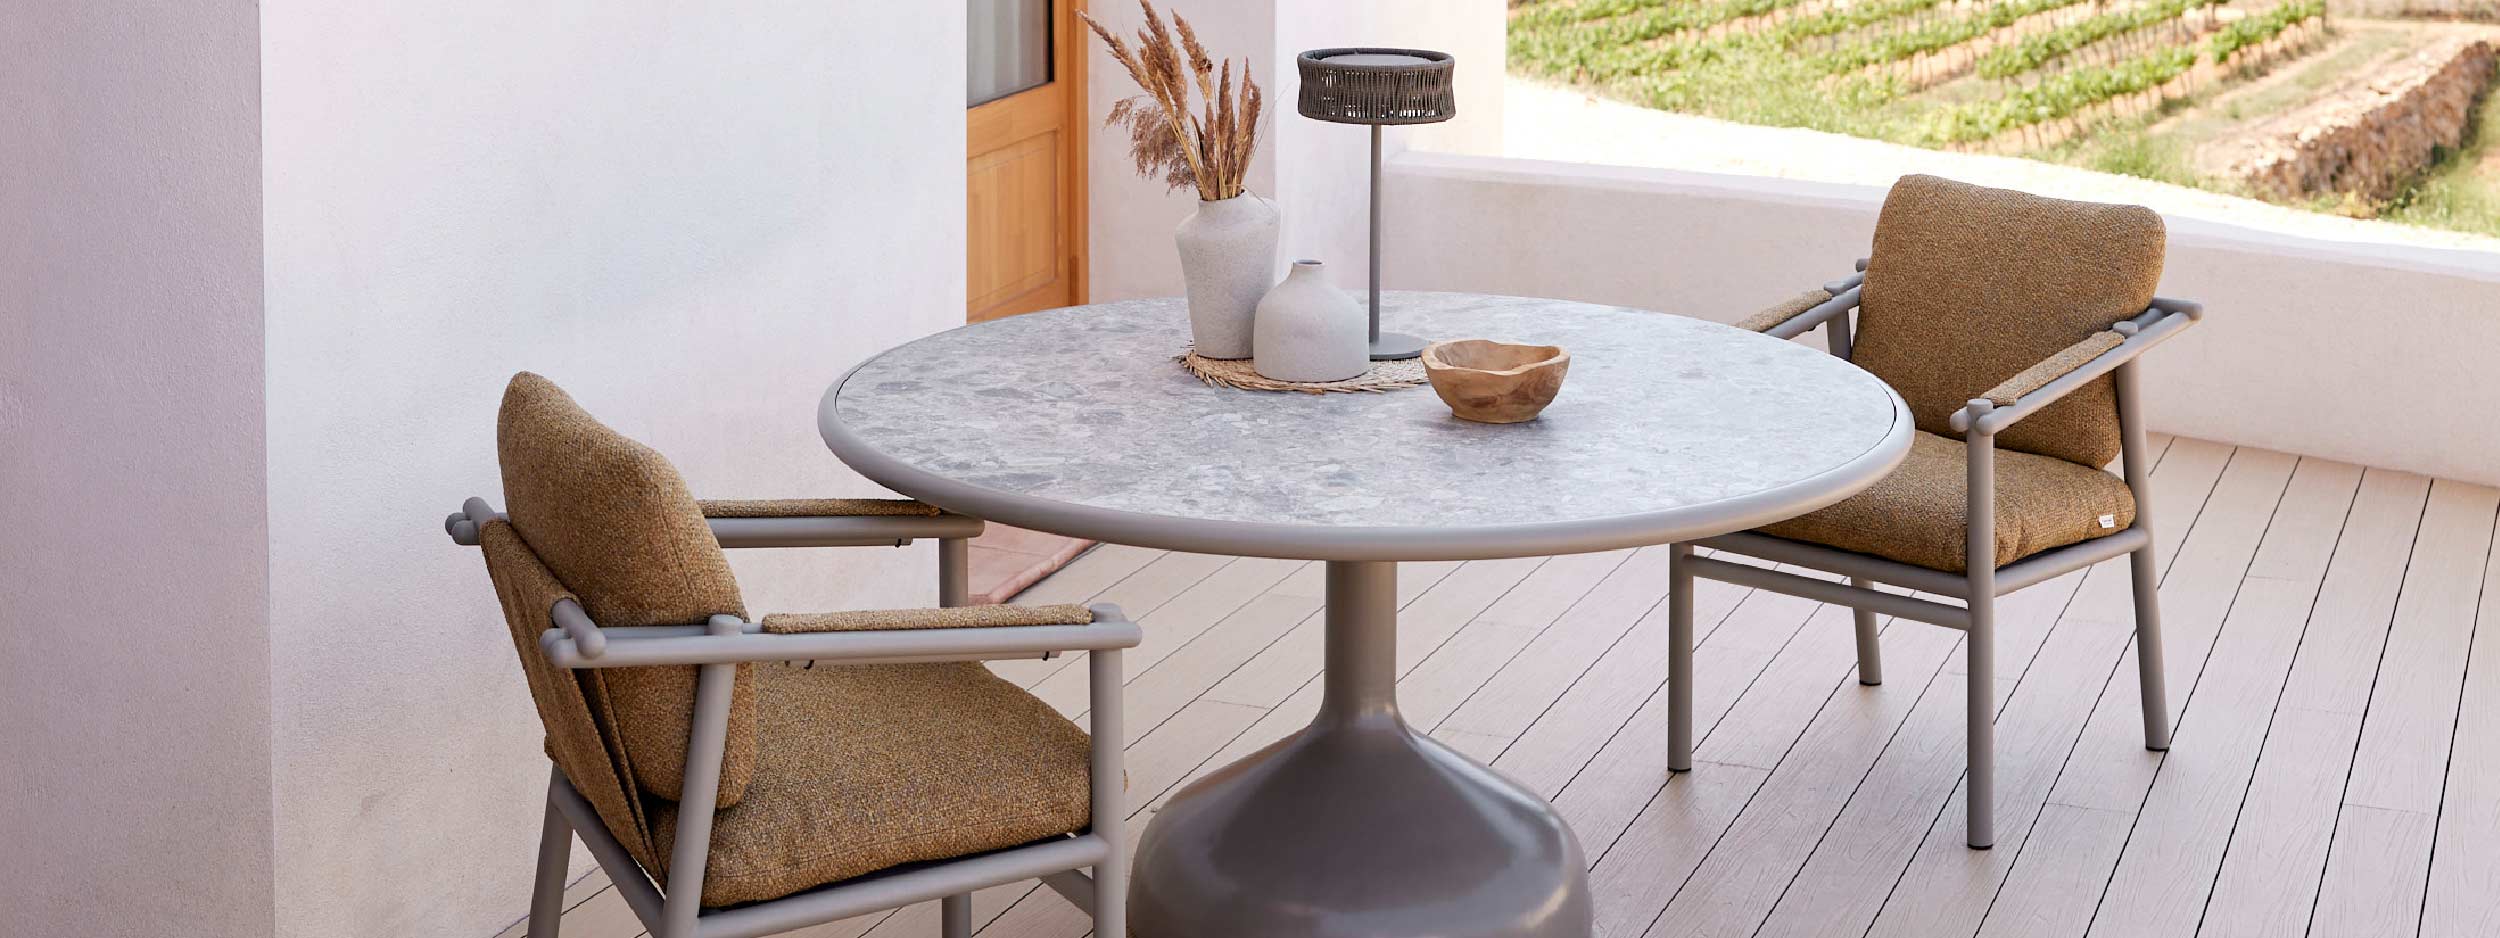 Image of Sticks aluminium garden chairs and Glaze round dining table by Cane-line